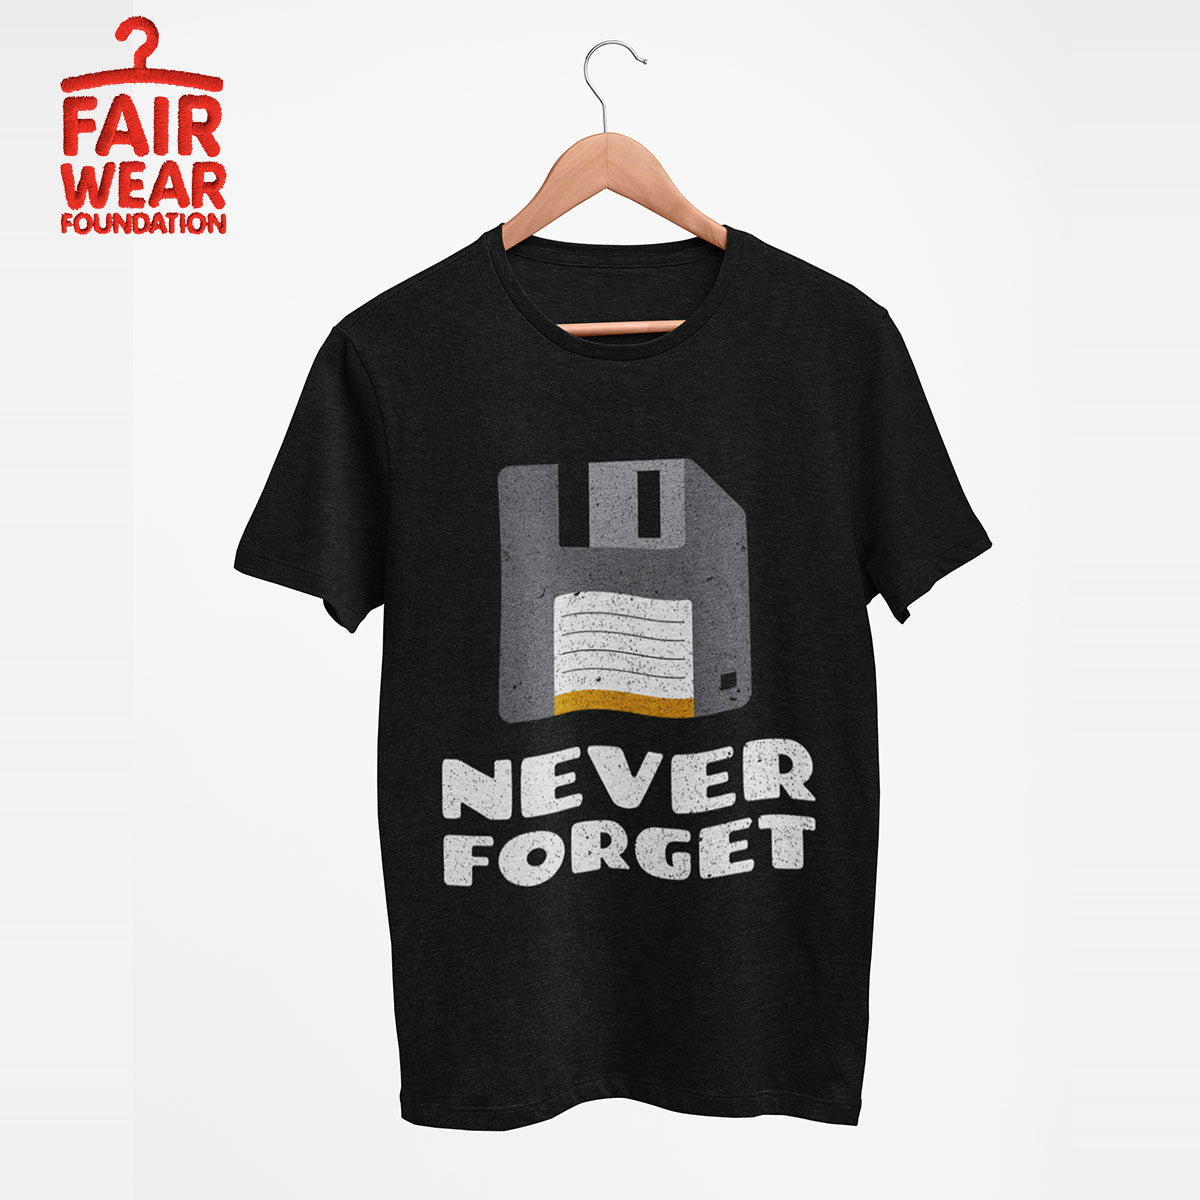 Never Forget PC Floppy Disk - Eco Retro T-Shirt Collection - Kuzi Tees